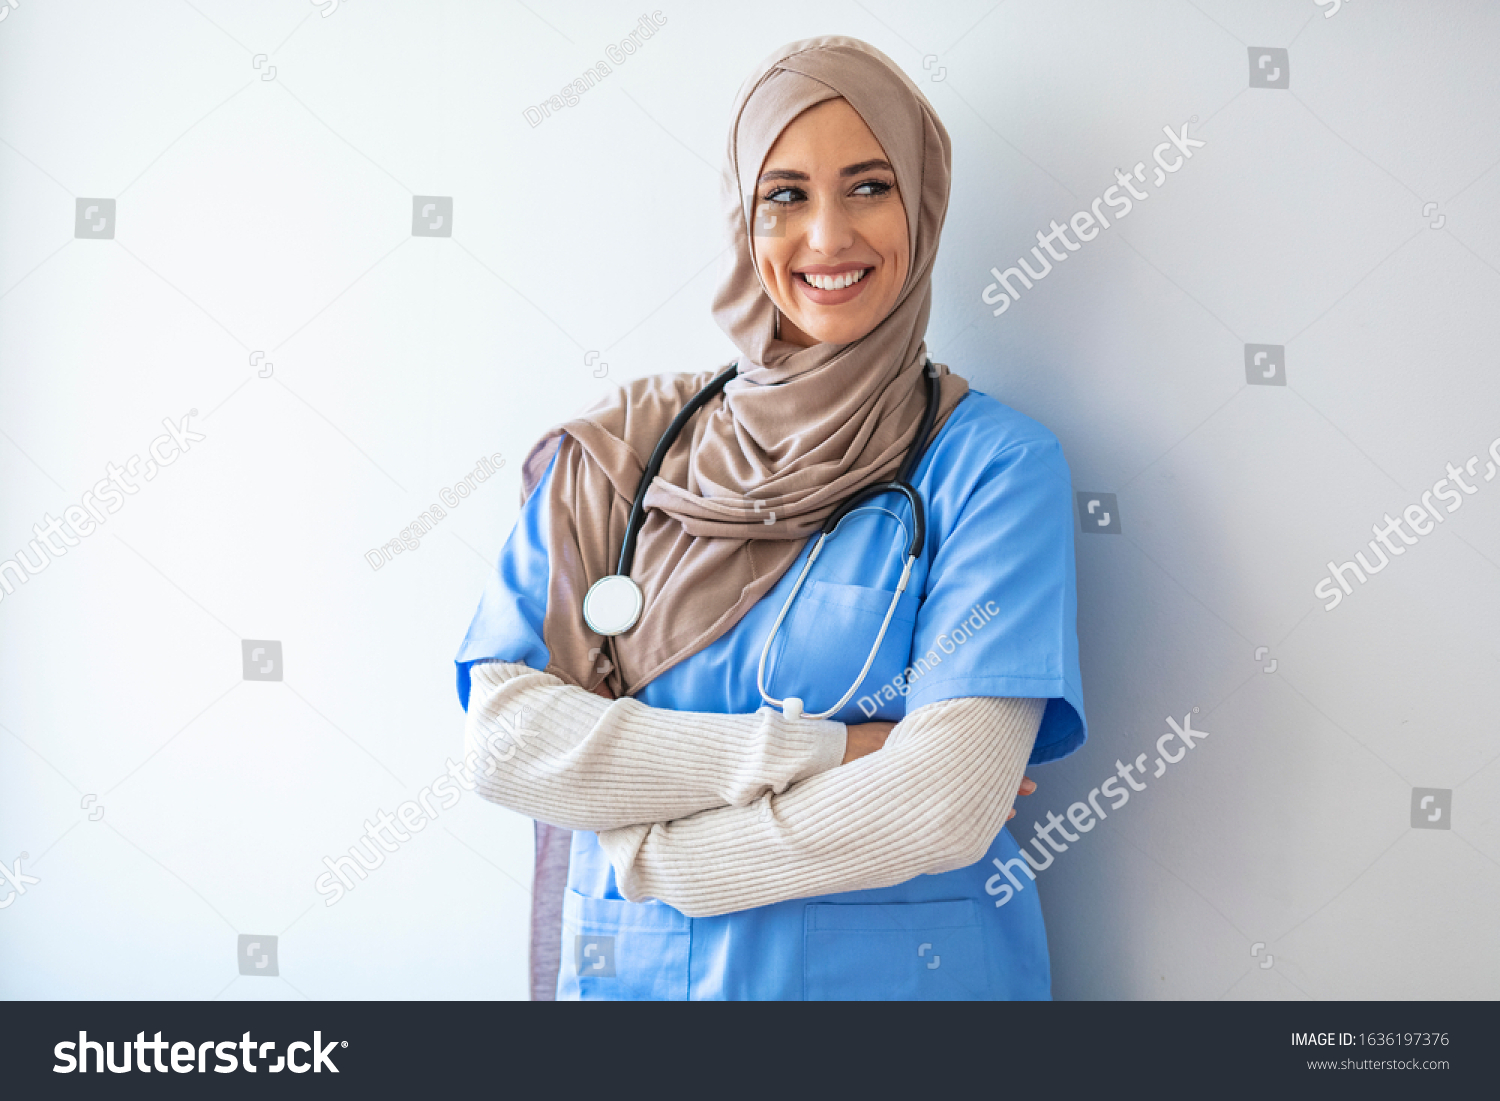 Arab nurse woman wearing hijab over isolated background looking away to side with smile on face, natural expression. Laughing confident. Authentic Confident Middle Eastern Healthcare Worker #1636197376